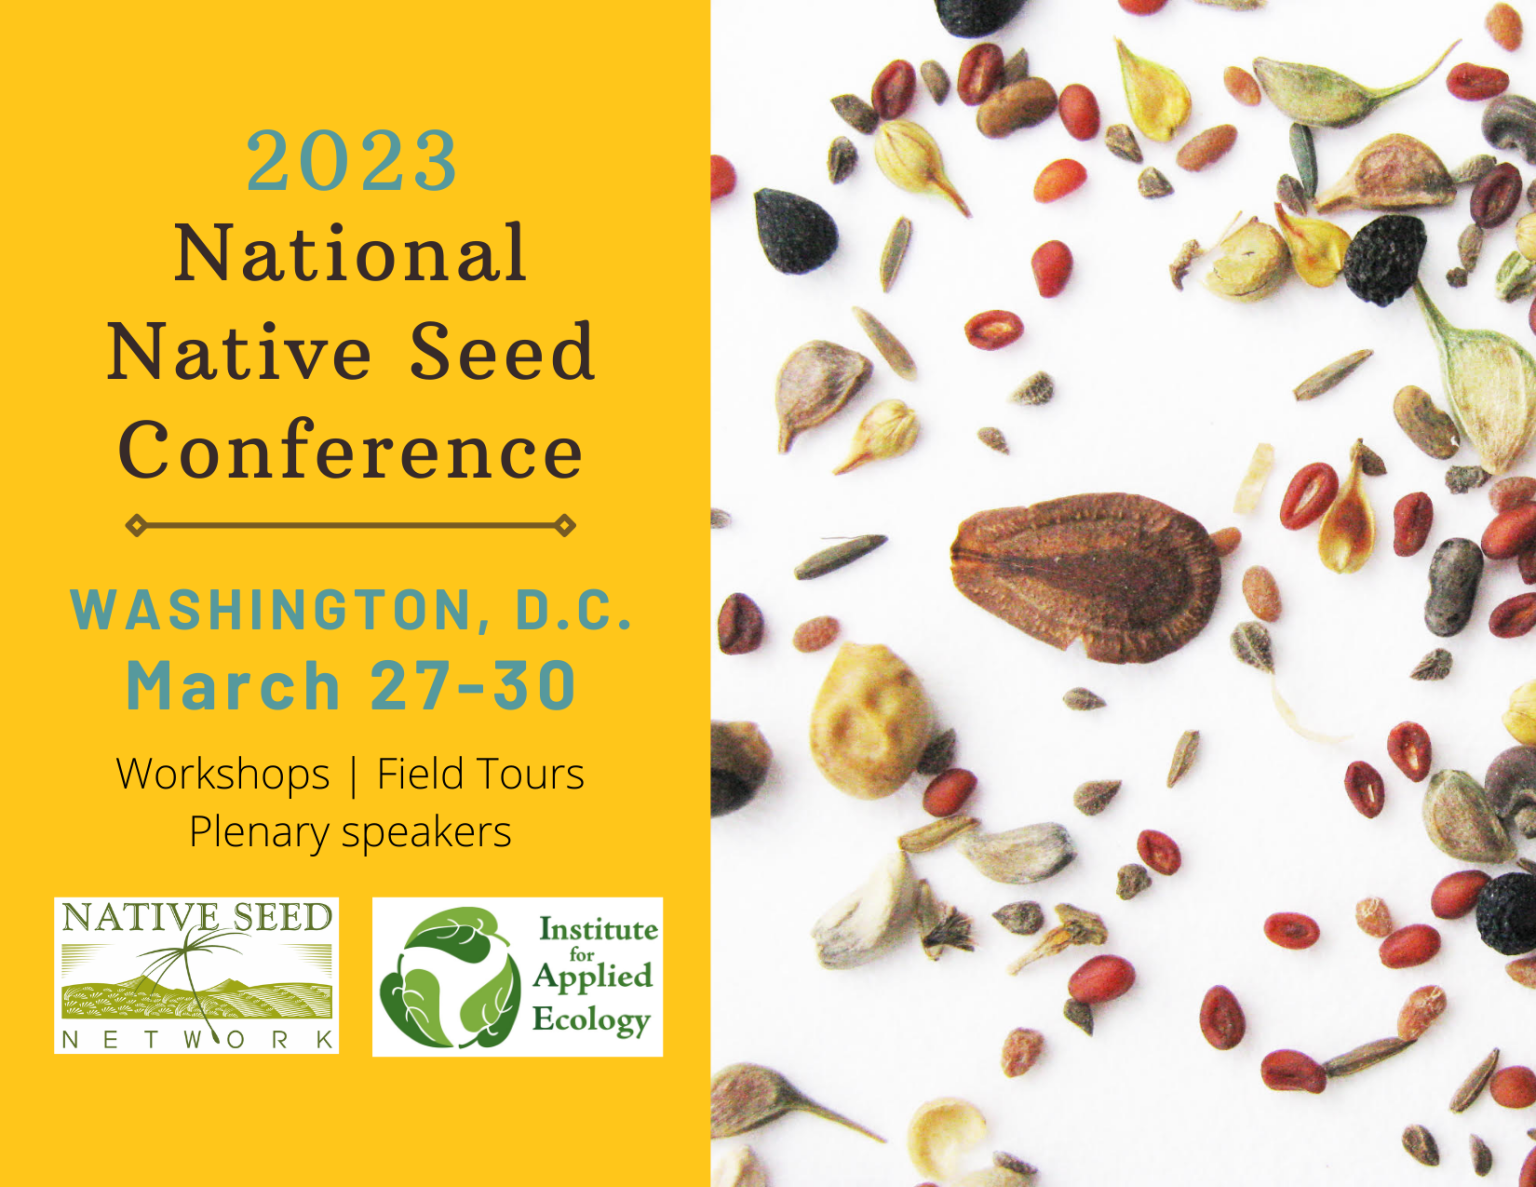 National Native Seed Conference Institute for Applied Ecology